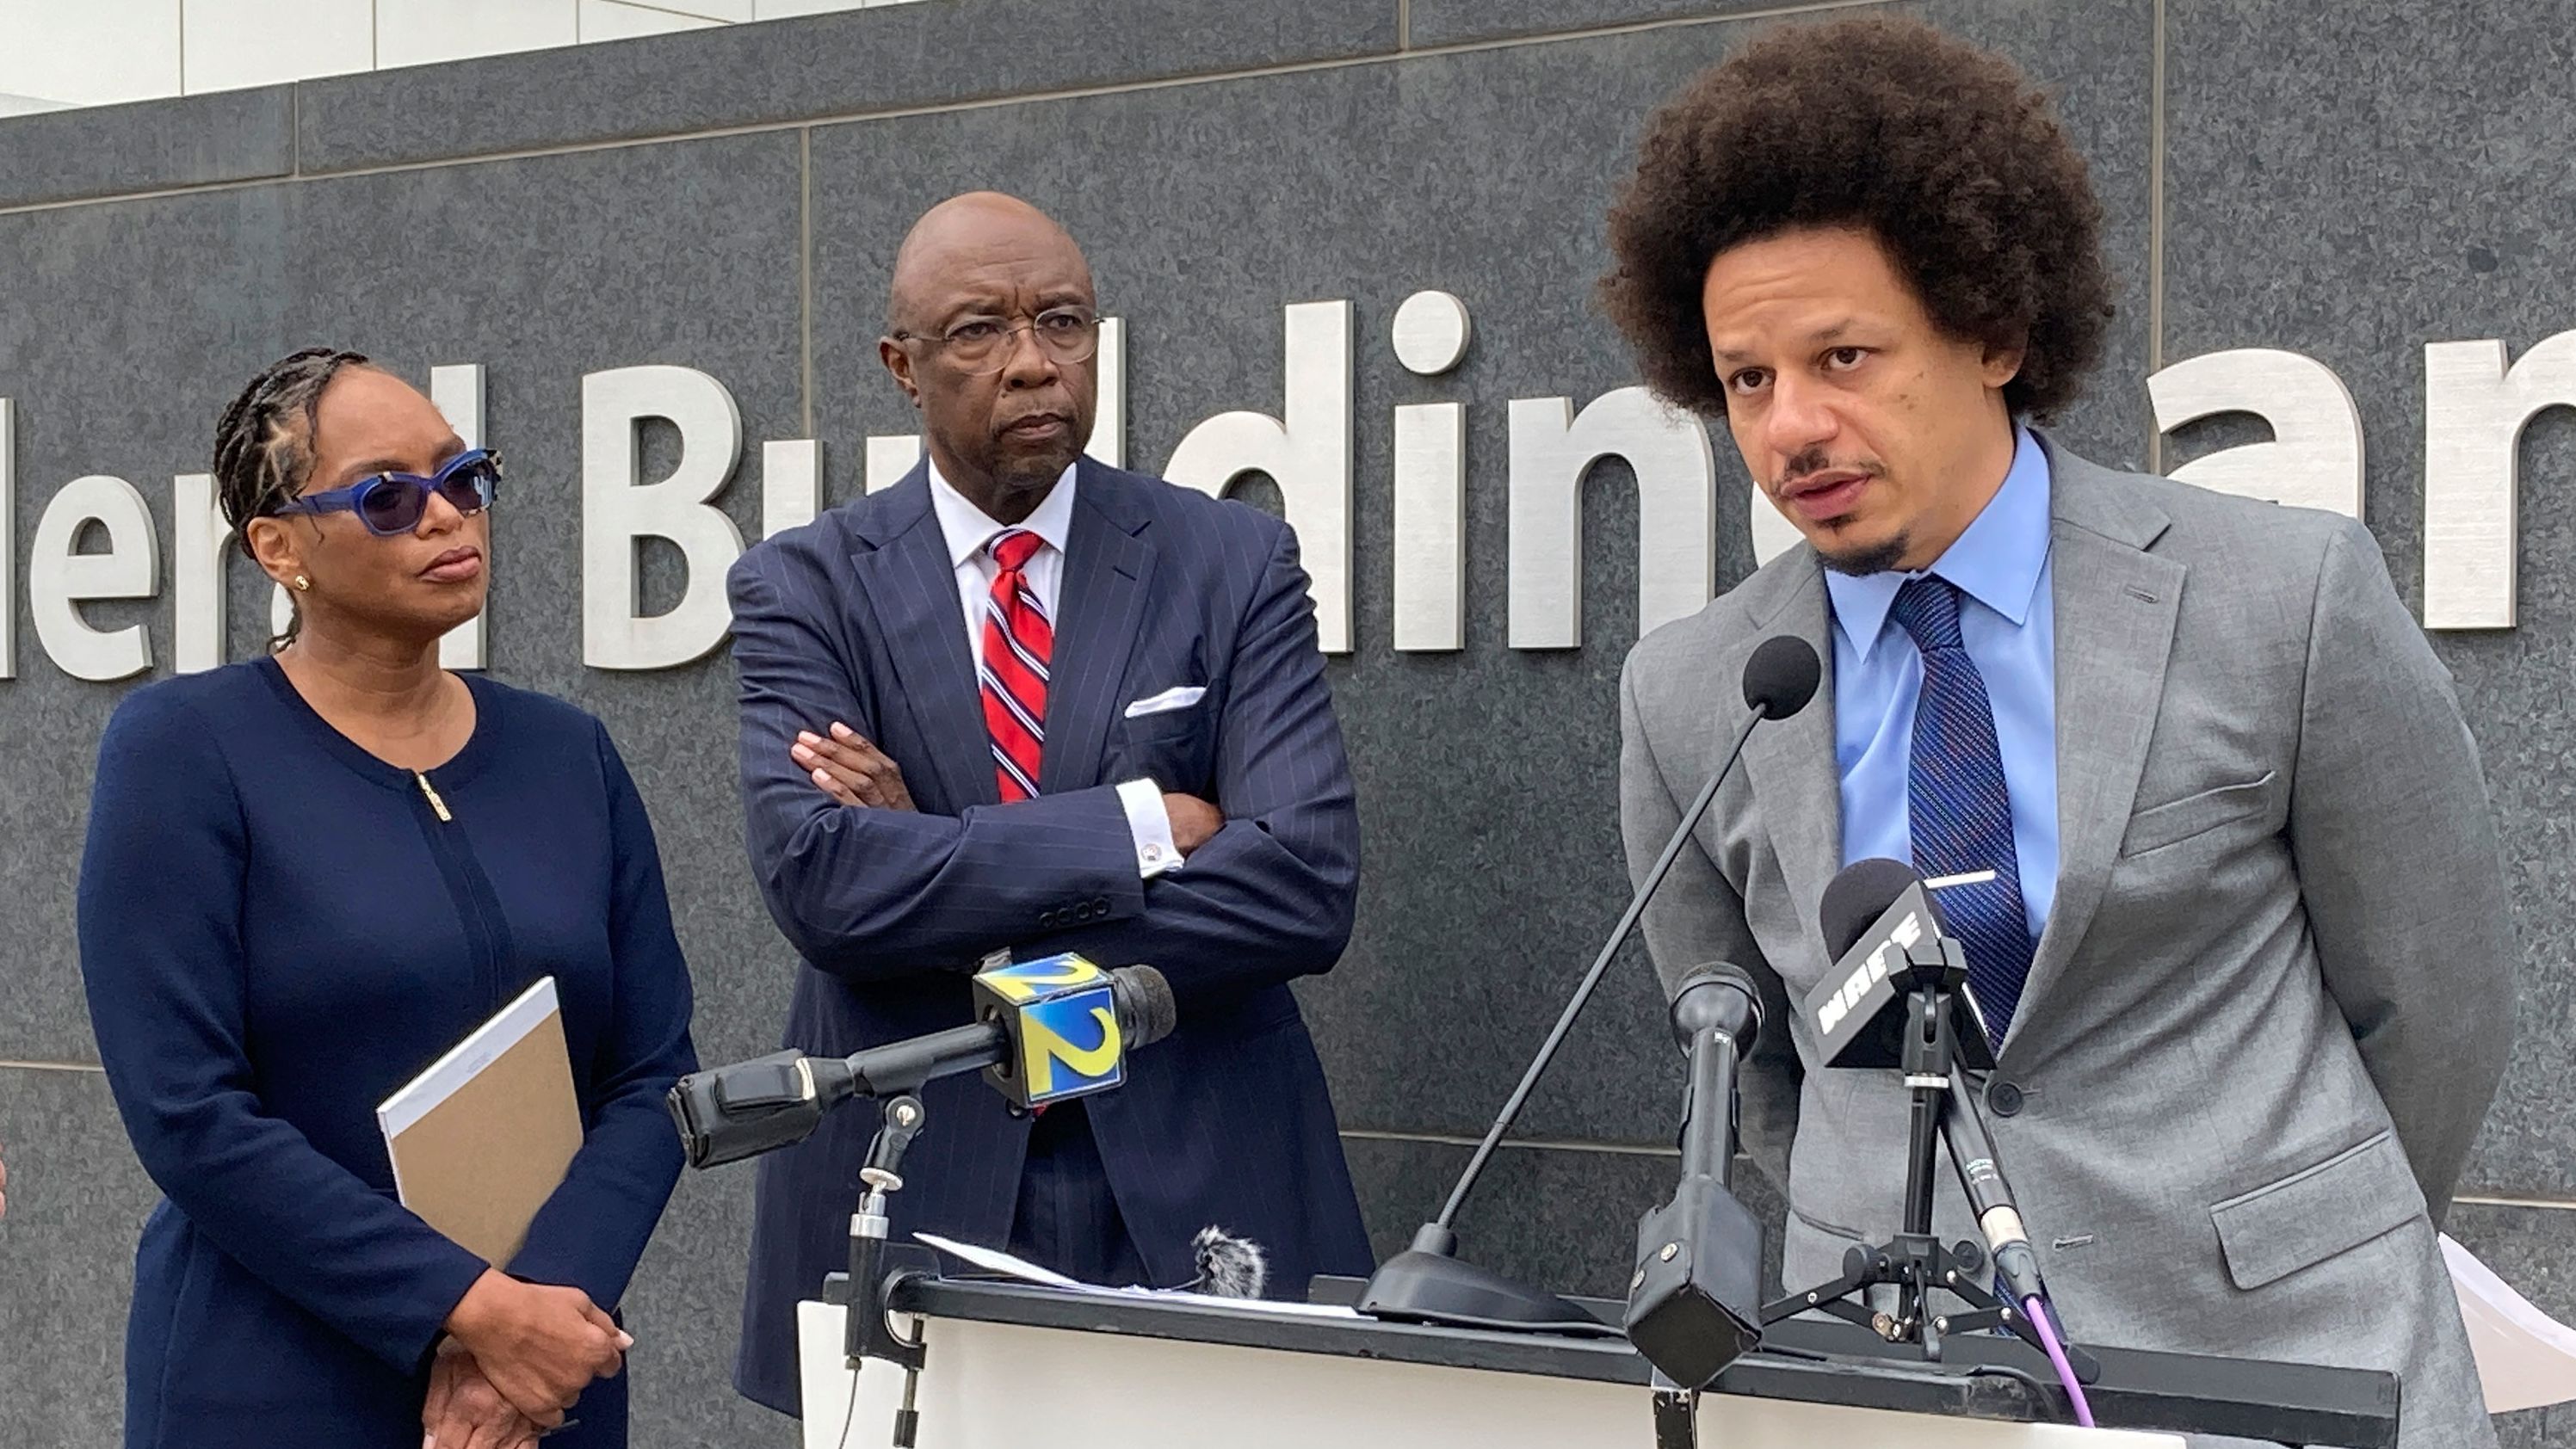 Comedian Eric André, right, speaks at a news conference in Atlanta on Tuesday.